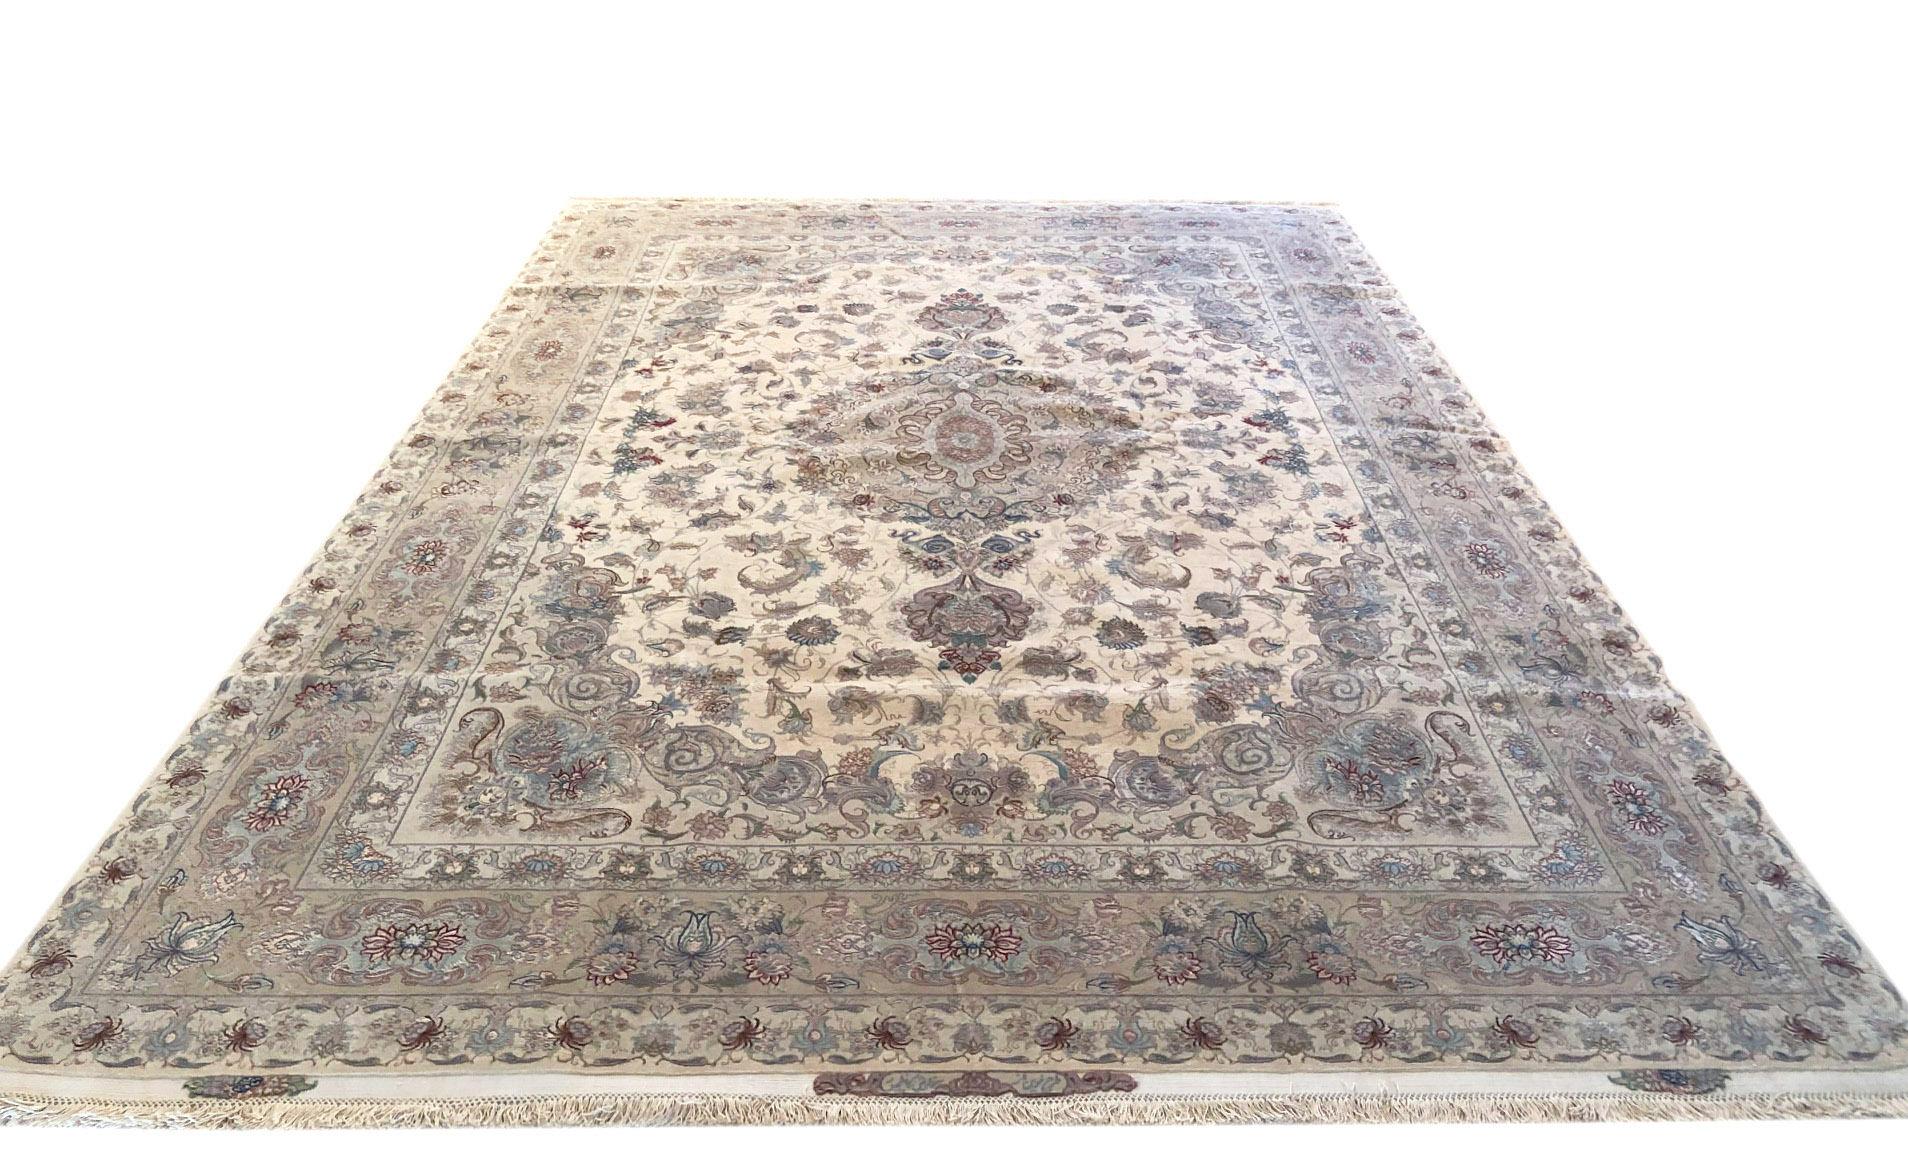 This rug is a hand knotted master piece Persian Tabriz rug with a great quality. This rug features a floral medallion pattern and the pile is wool and silk with silk foundation. The size is 8 feet by 2 inches wide by 11 feet 10 inches tall. In this